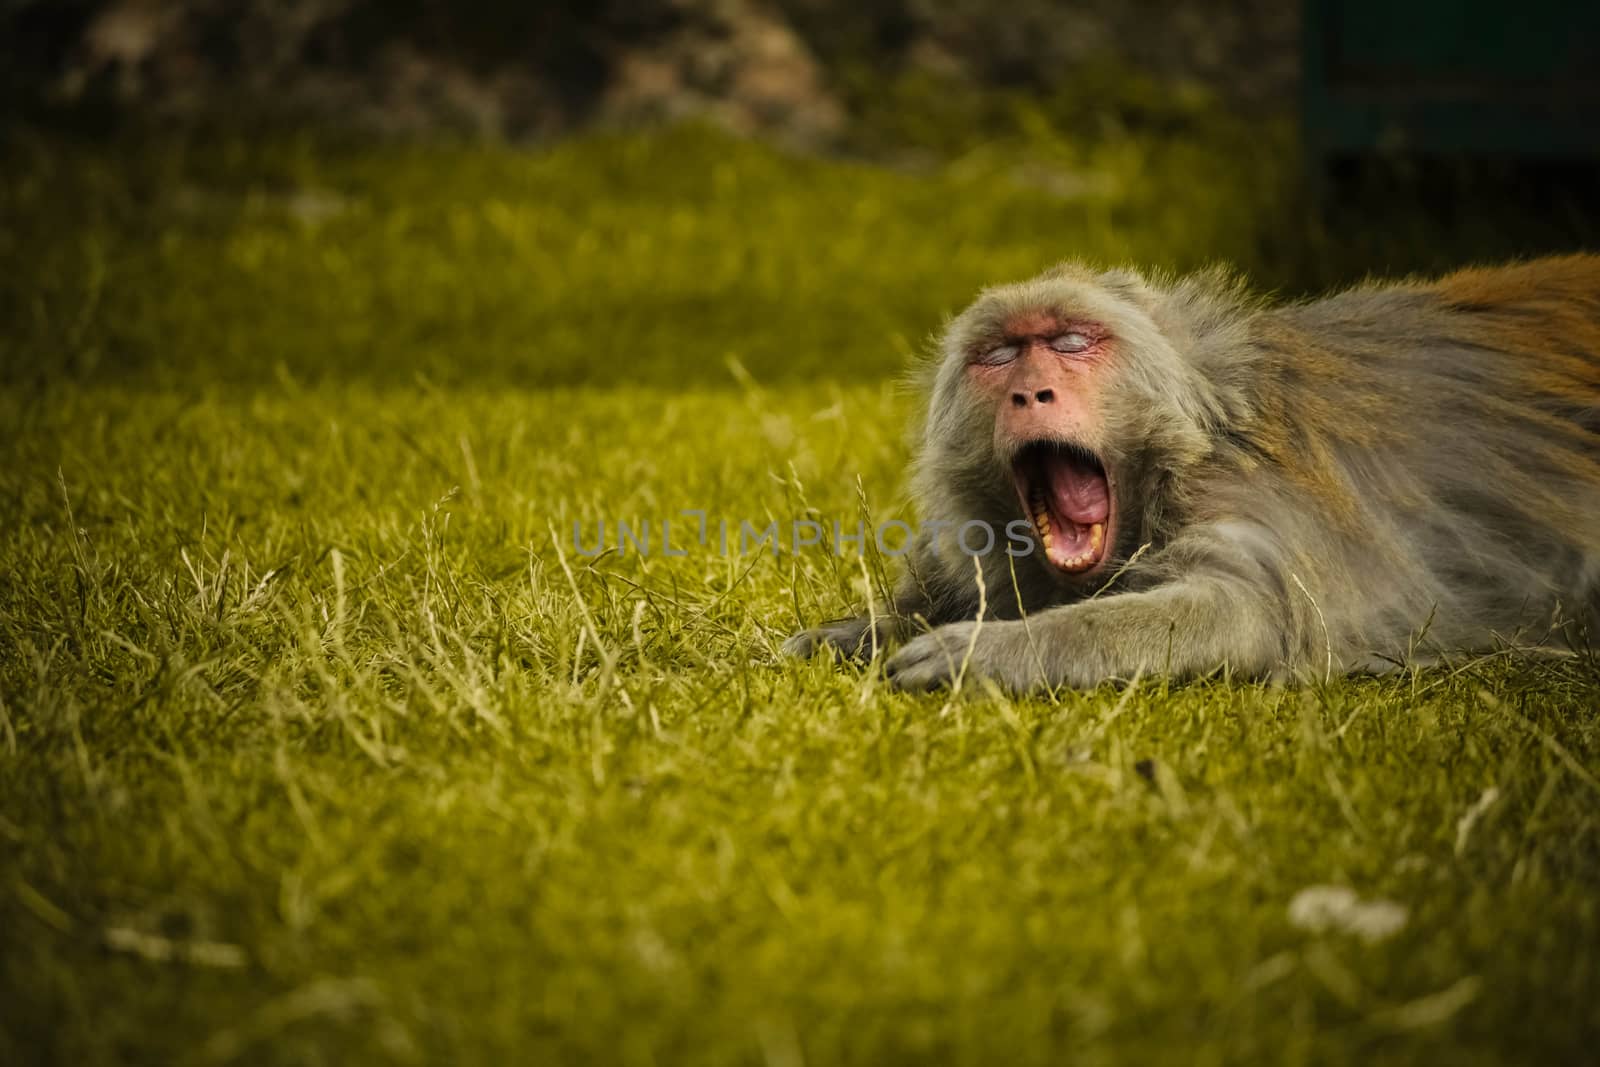 Cute hairy monkey opens his mouth for a big yawn by frameshade